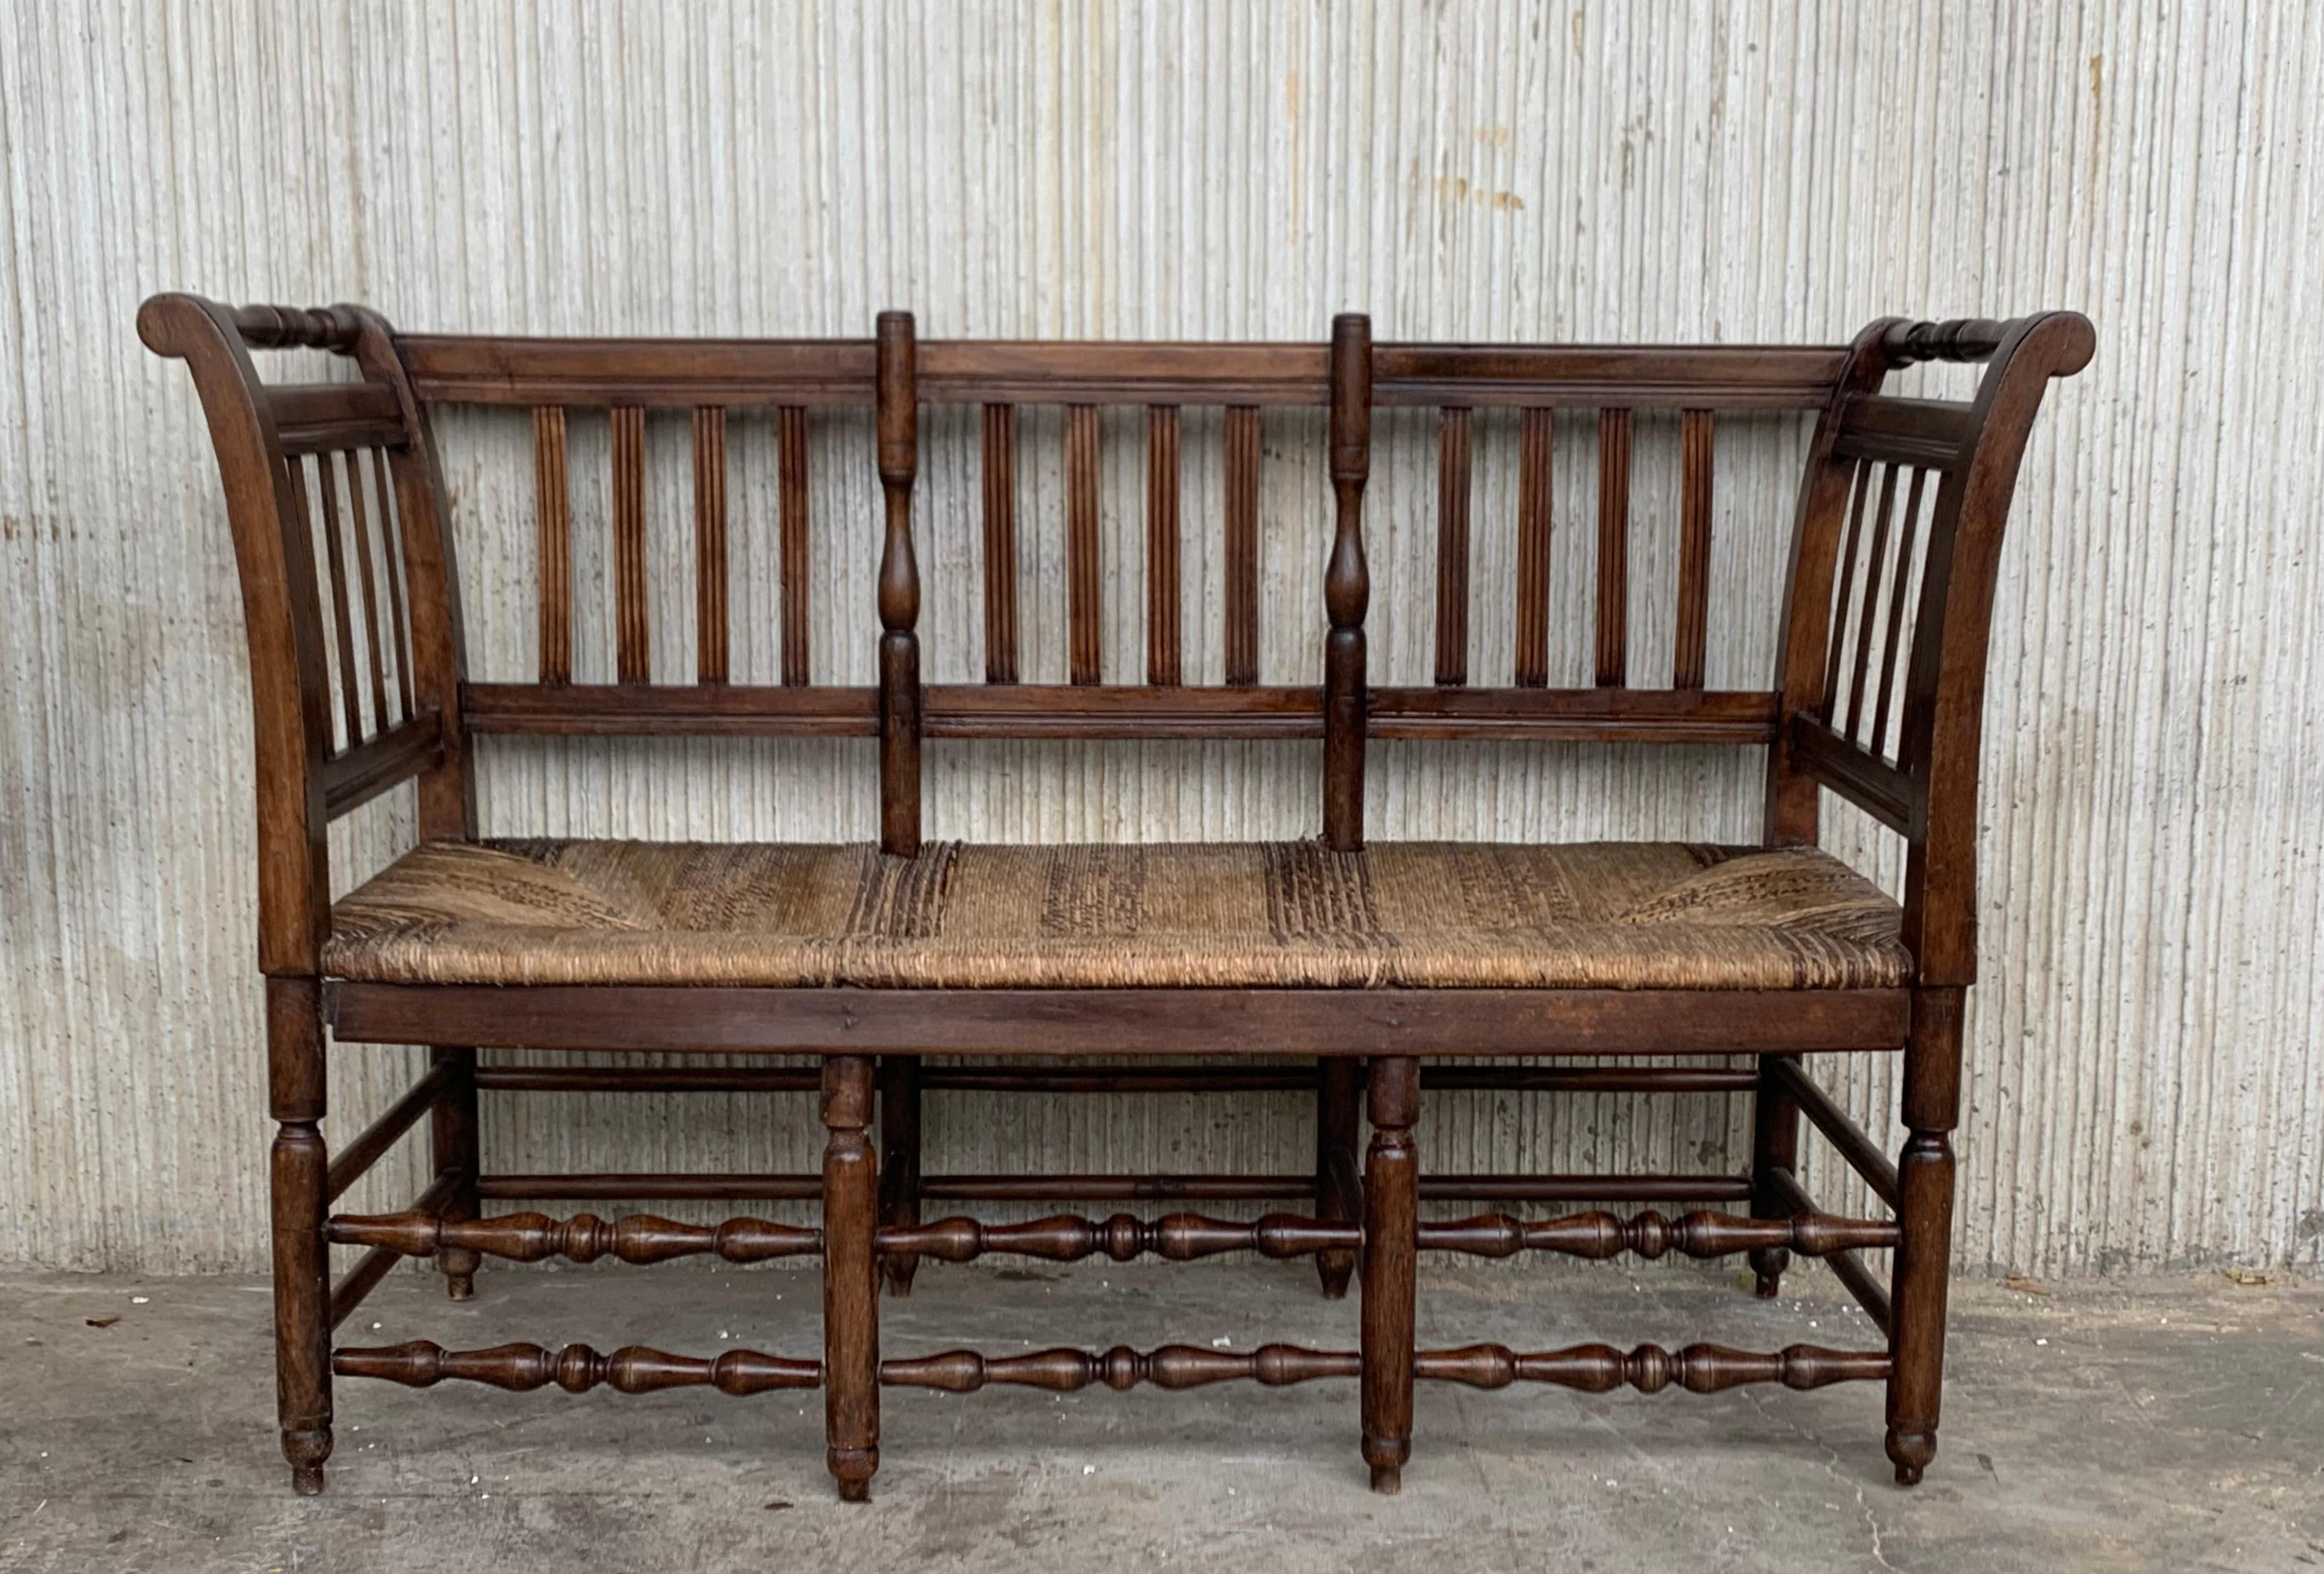 spanish style outdoor bench